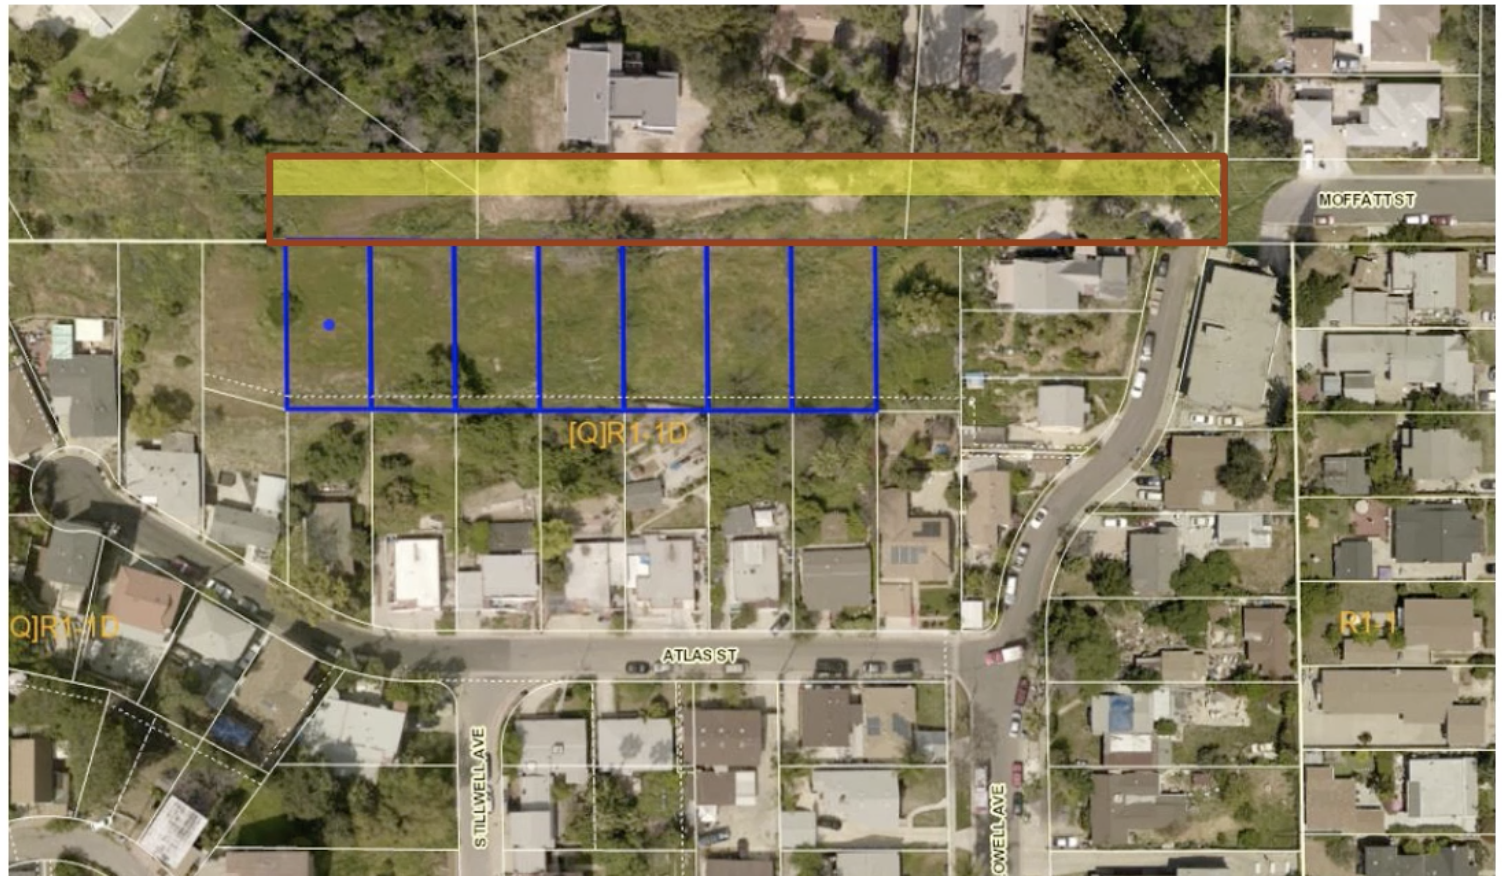 Thumbnail for Community opposition to Moffatt Street extension compels City Council to table proposal